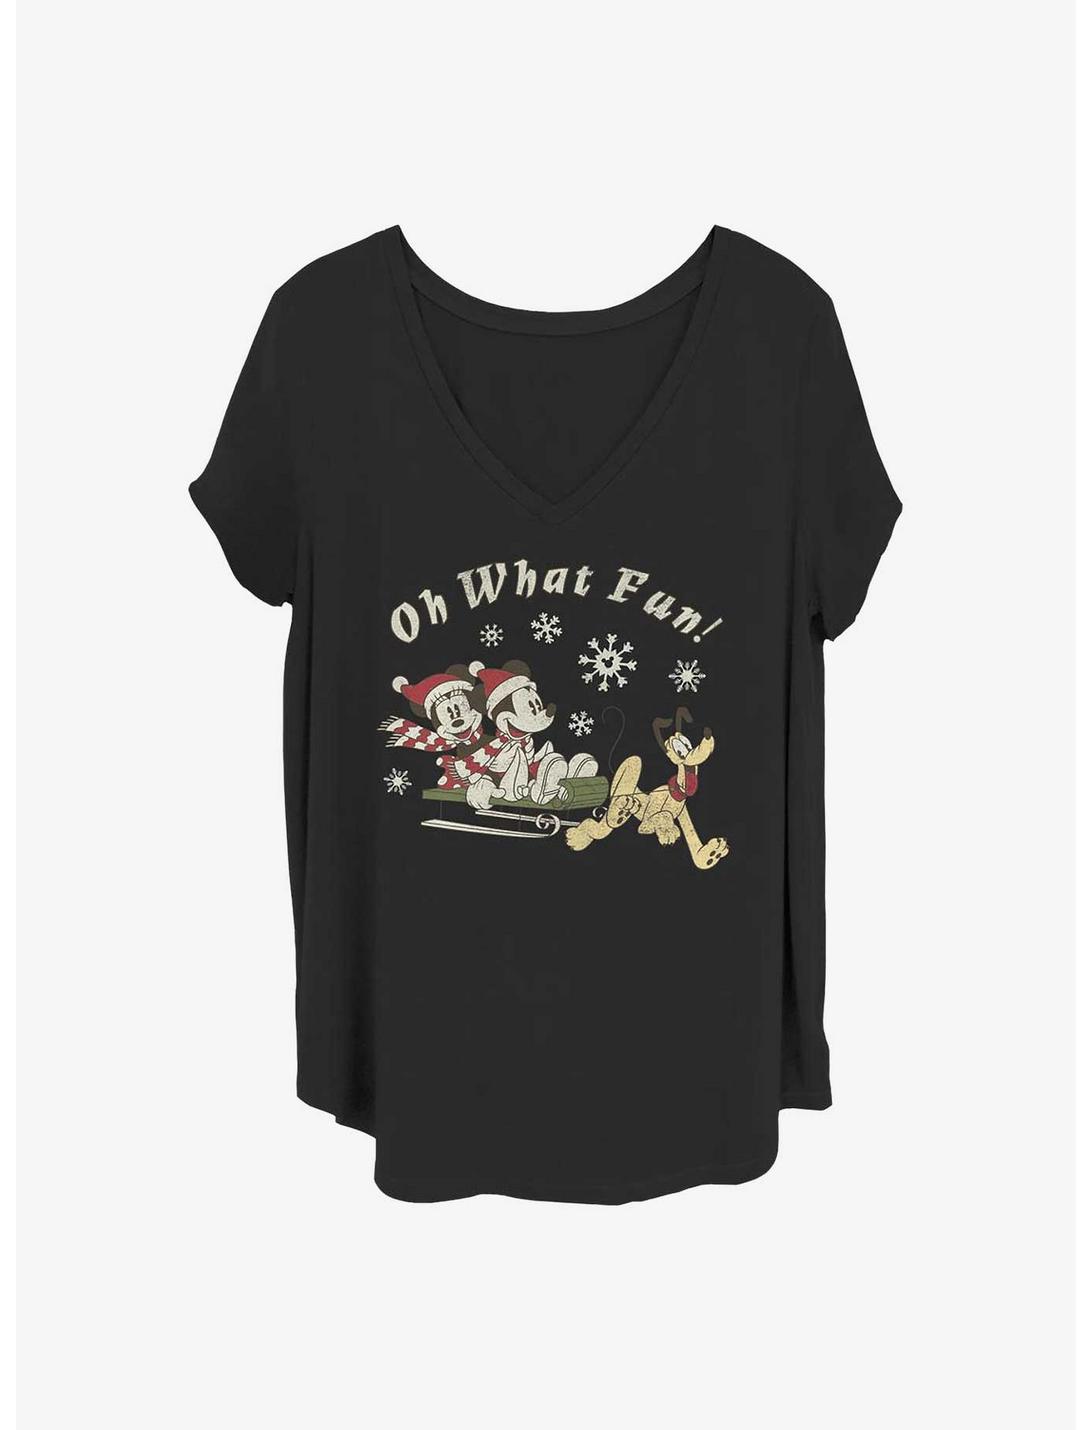 Disney Mickey Mouse And Minnie Mouse Holiday Oh What Fun Girls T-Shirt Plus Size, BLACK, hi-res